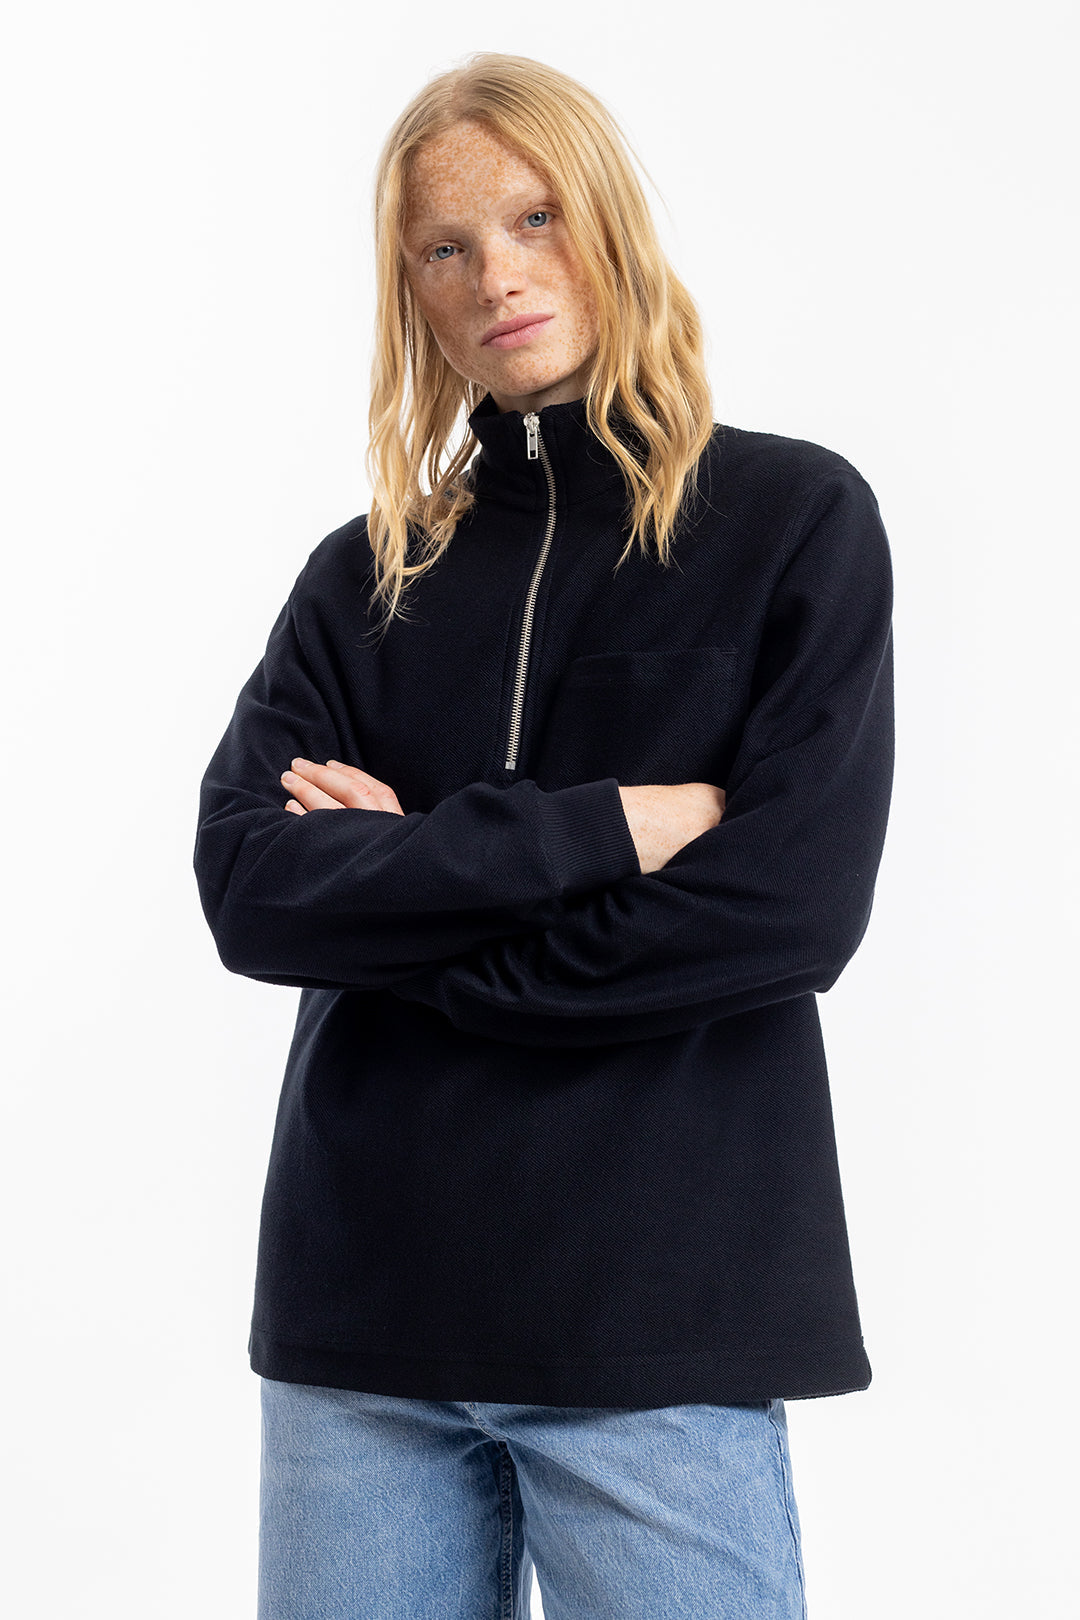 Black sweatshirt made from 100% organic cotton from Rotholz